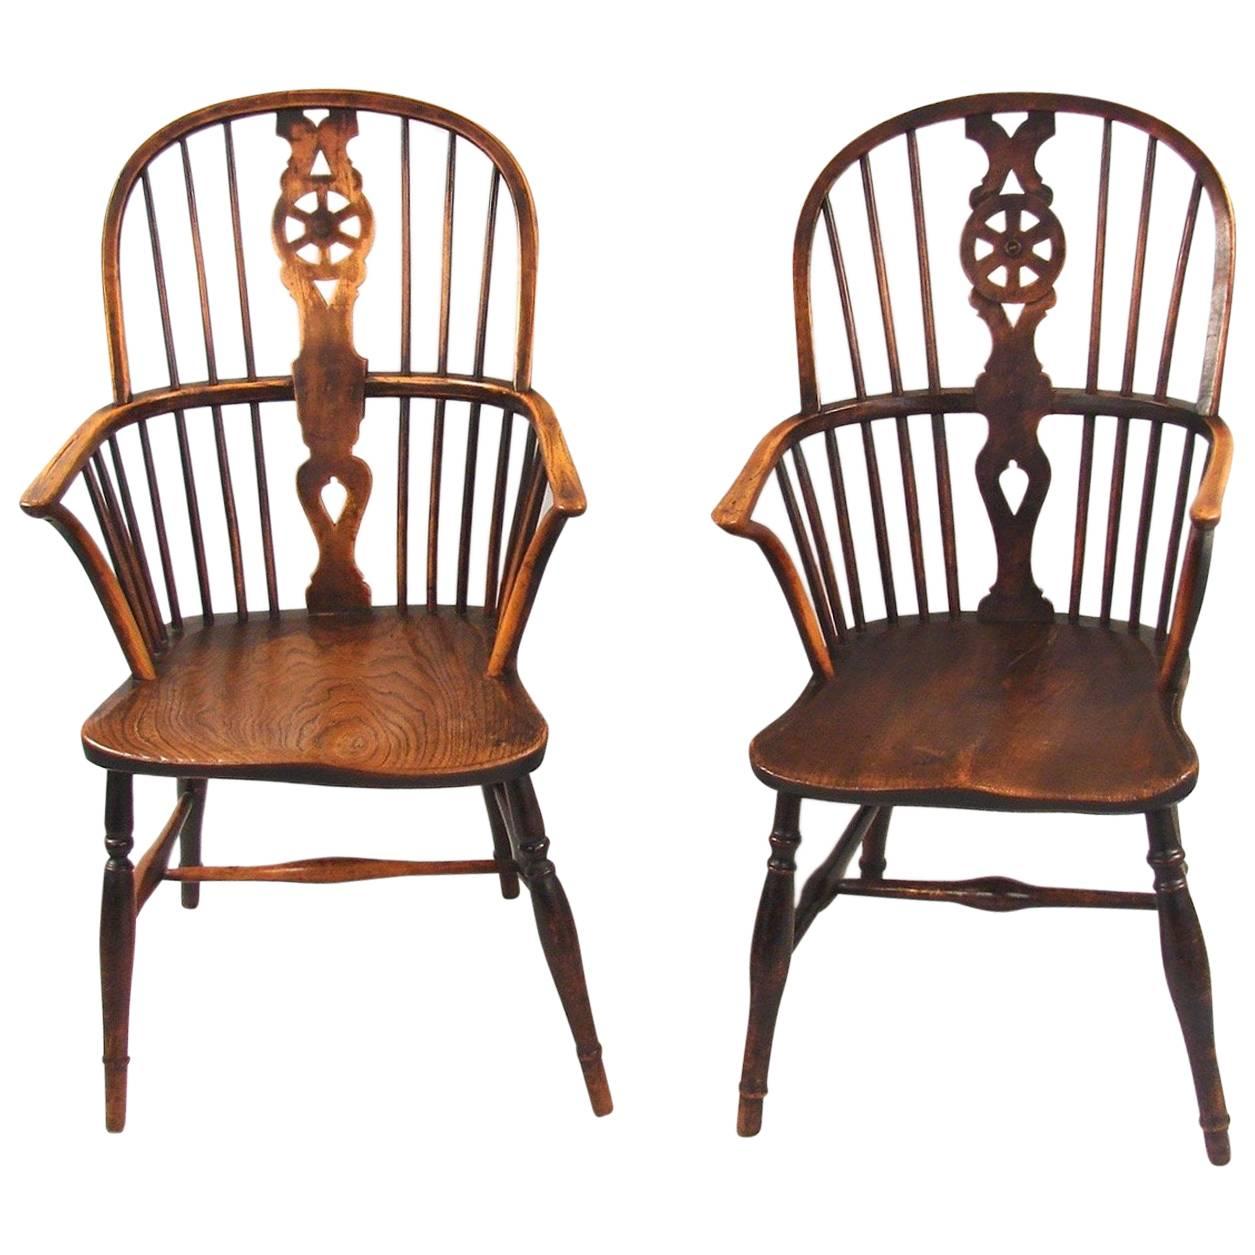 Matched Pair of English Wheelback Windsor Armchairs